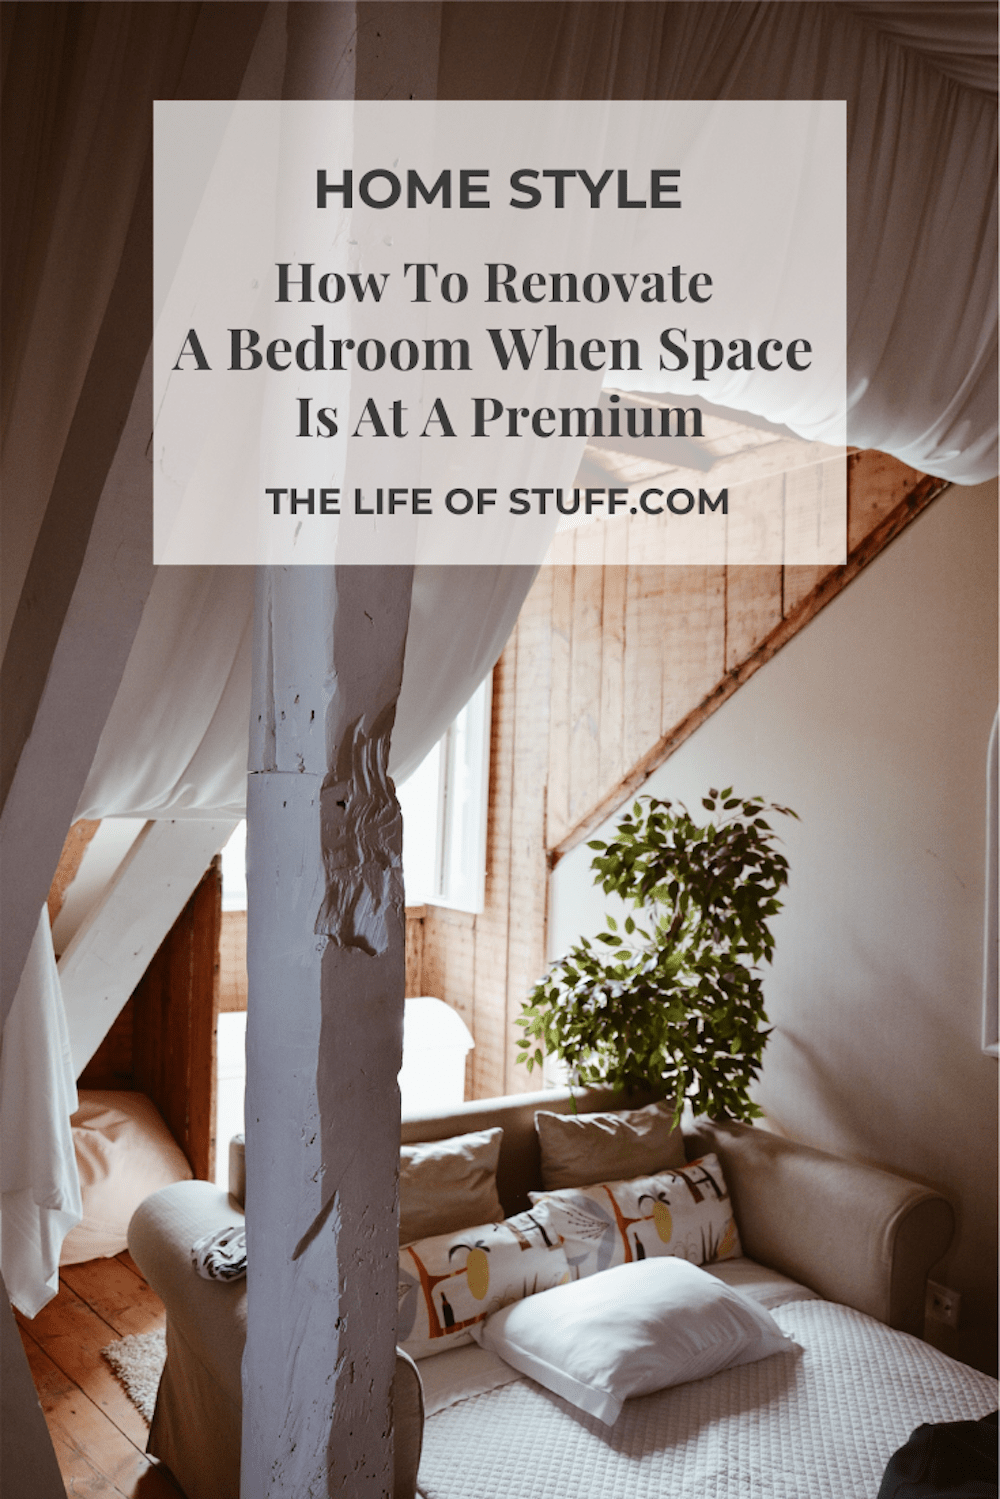 How To Renovate A Bedroom When Space Is At A Premium - The Life of Stuff